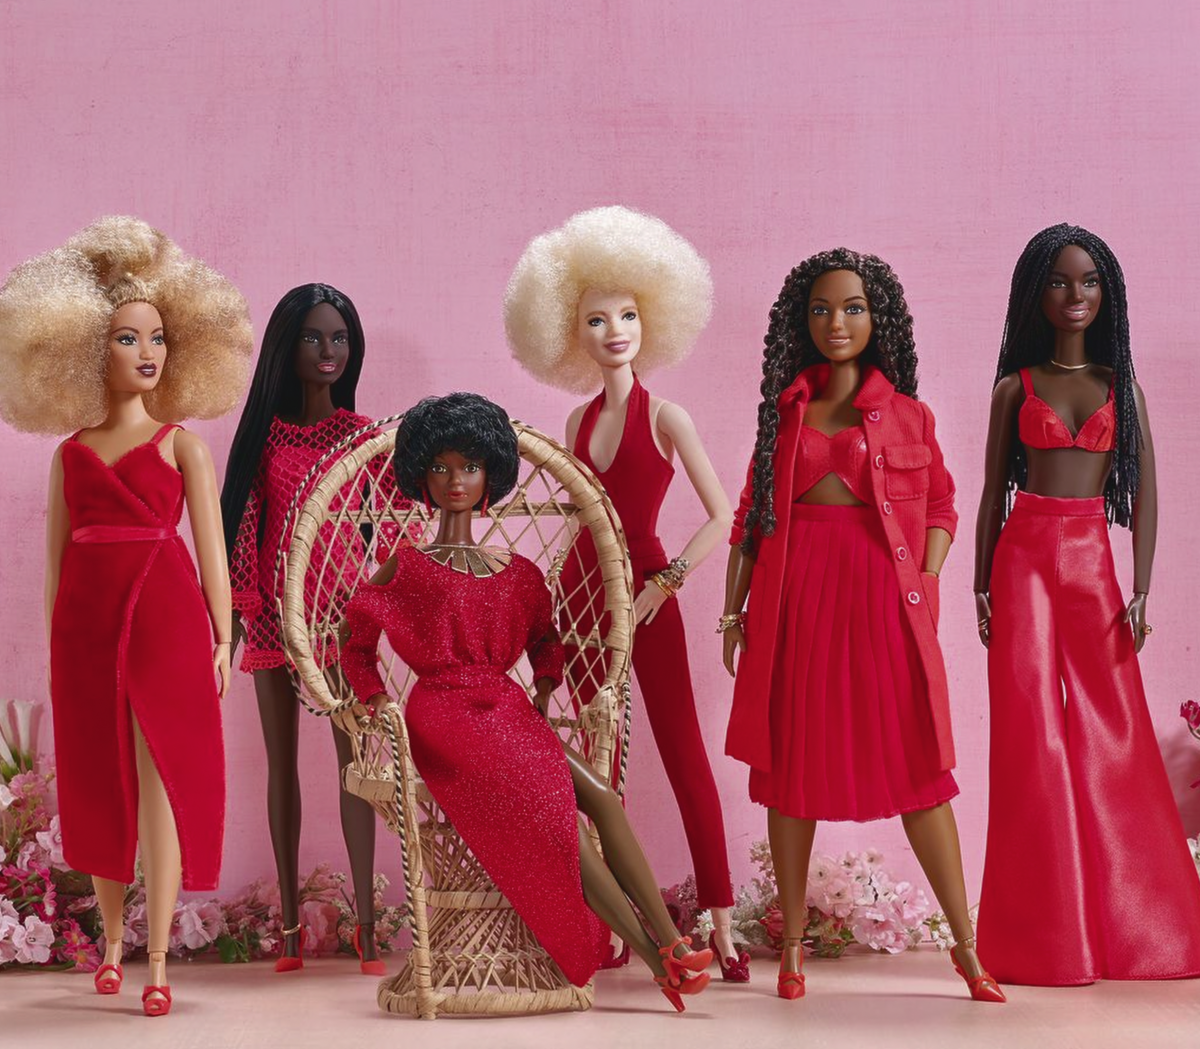 Black Barbie dolls of different skin tones wearing different red outfits.